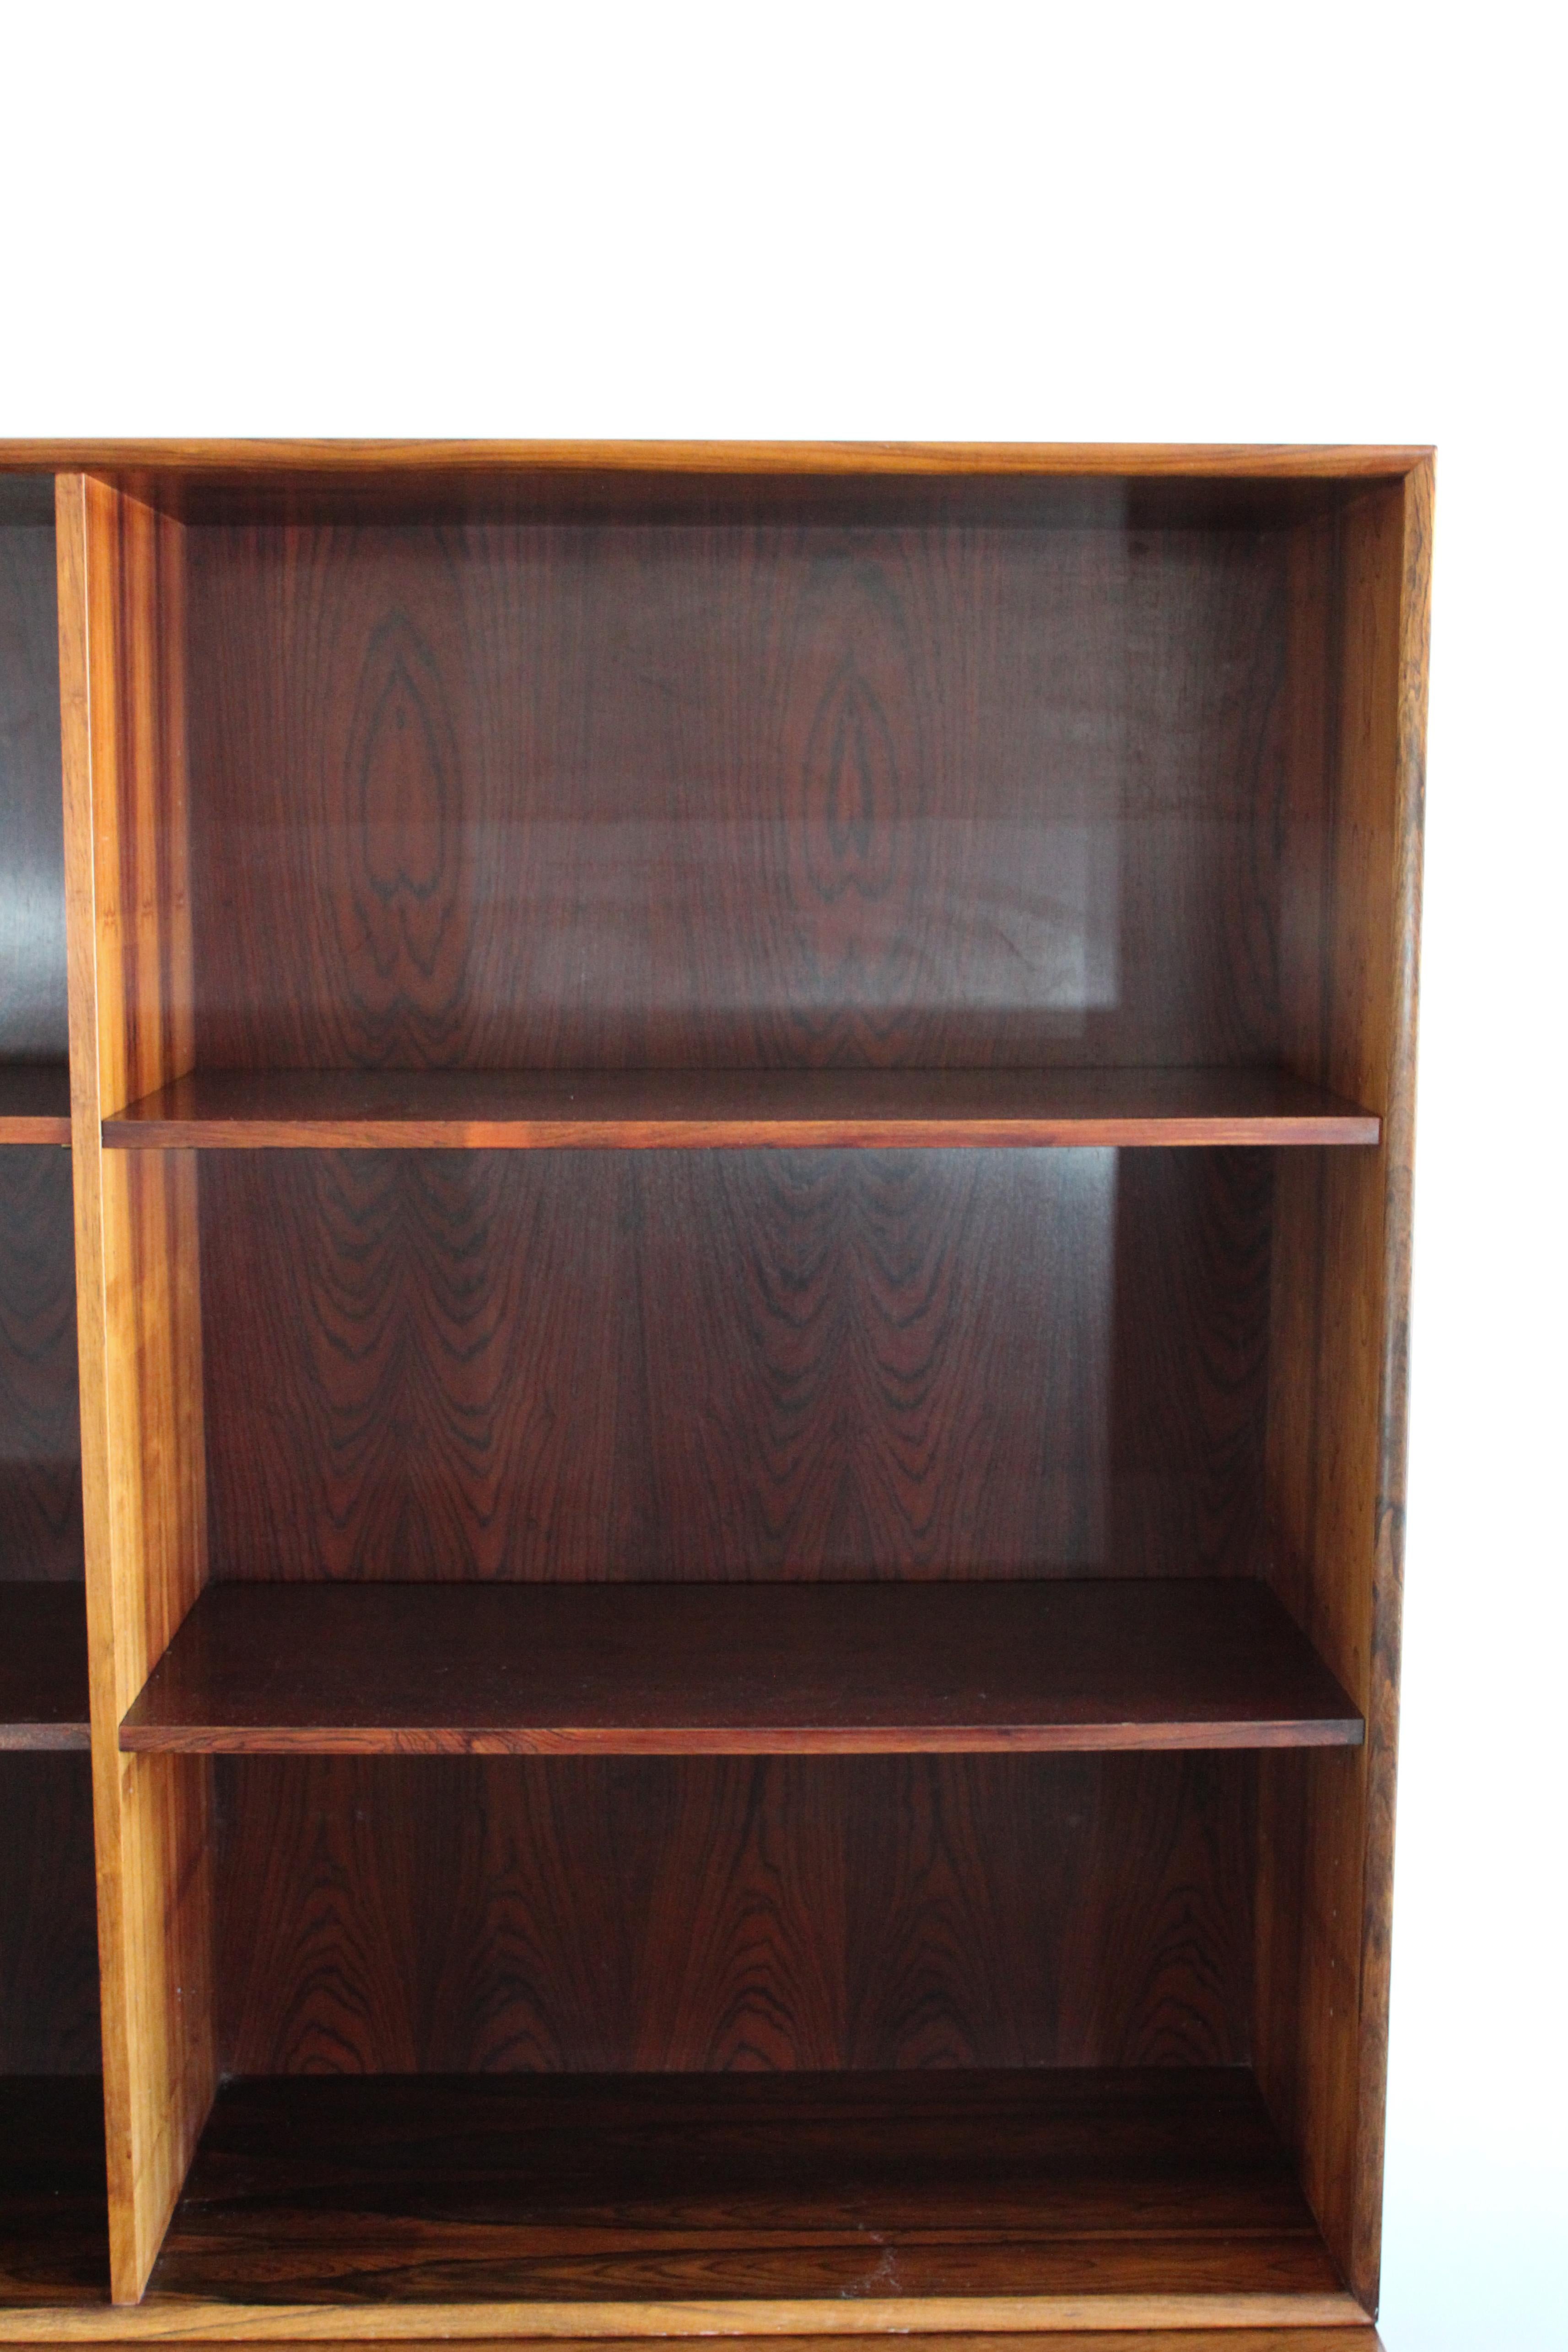 Midcentury Rosewood Arne Vodder Book Case with Tambour Doors by Sibast, 1950s im Angebot 11